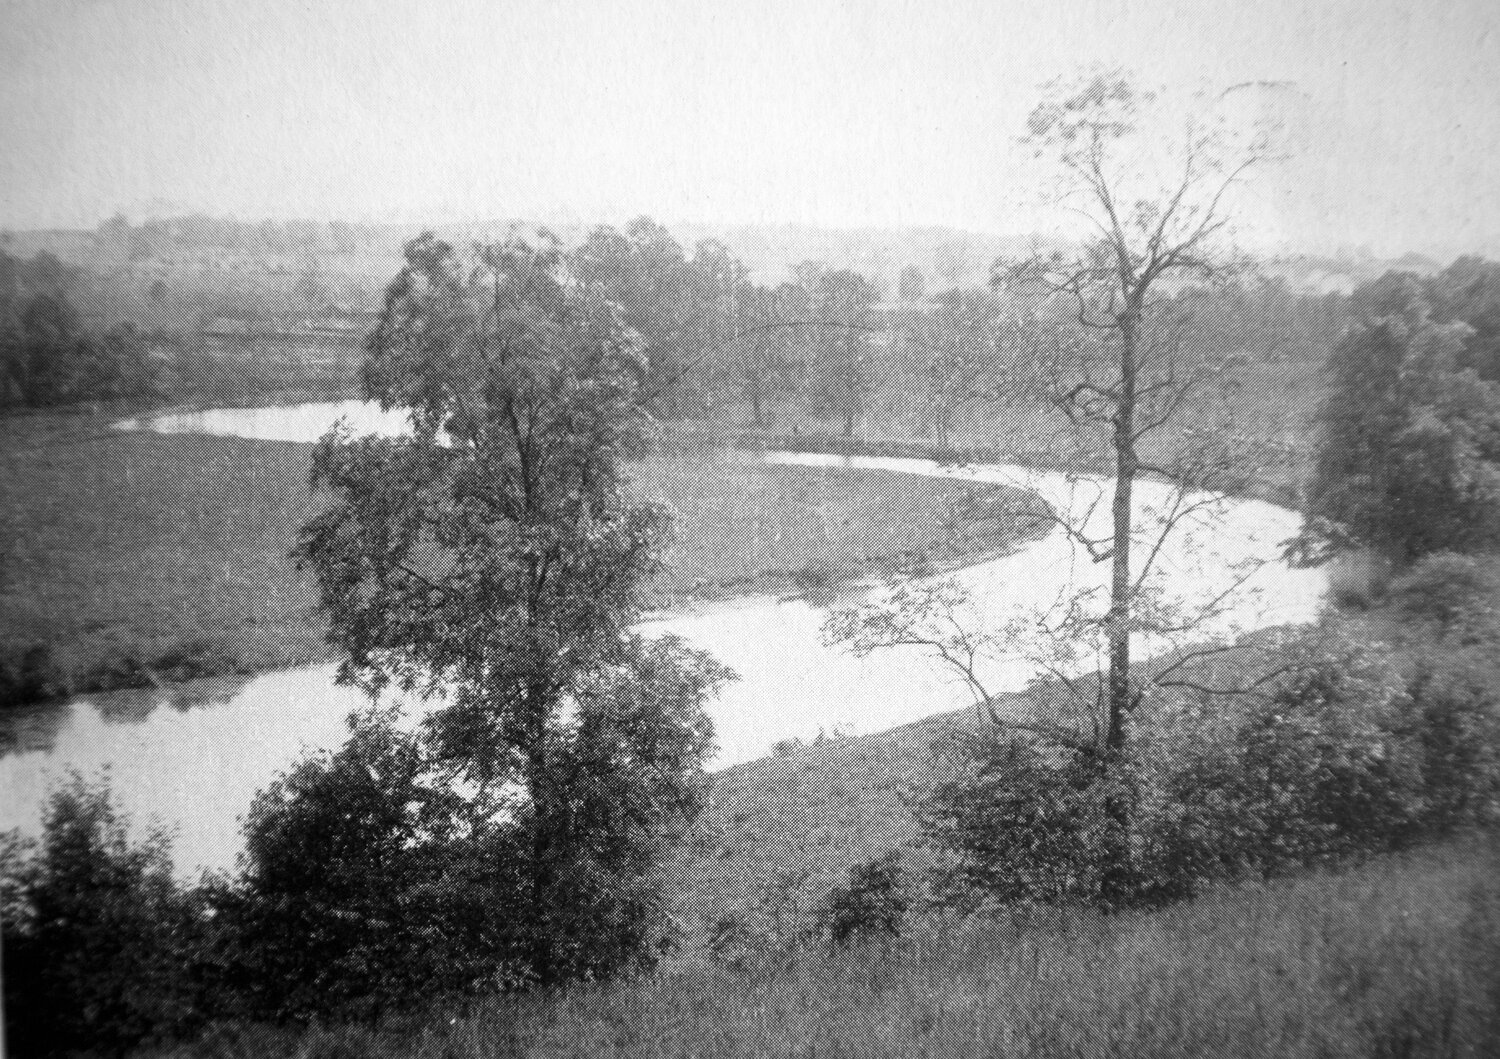 East Branch of Perkiomen Creek meanders through Perkasie and Sellersville in this image from about 1910.